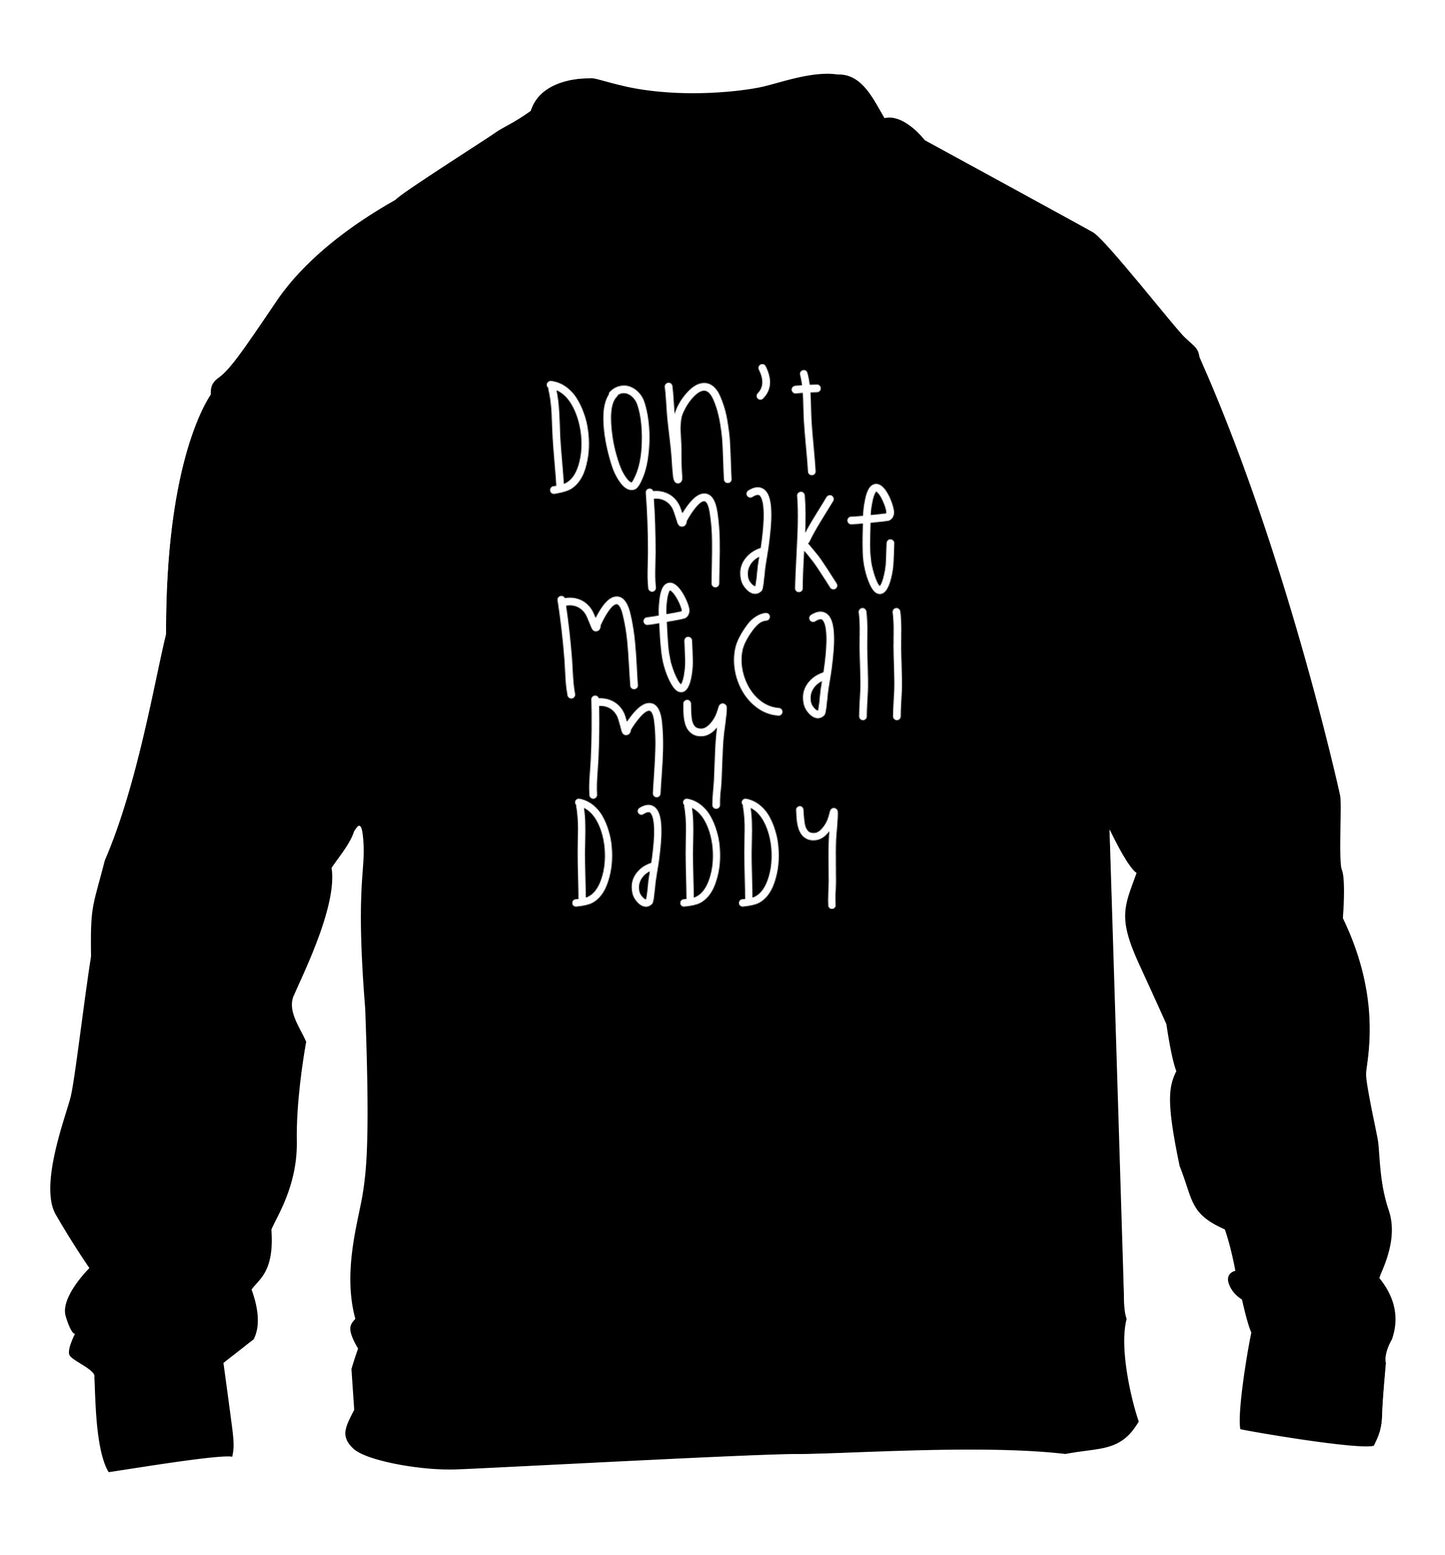 Don't make me call my daddy children's black sweater 12-14 Years